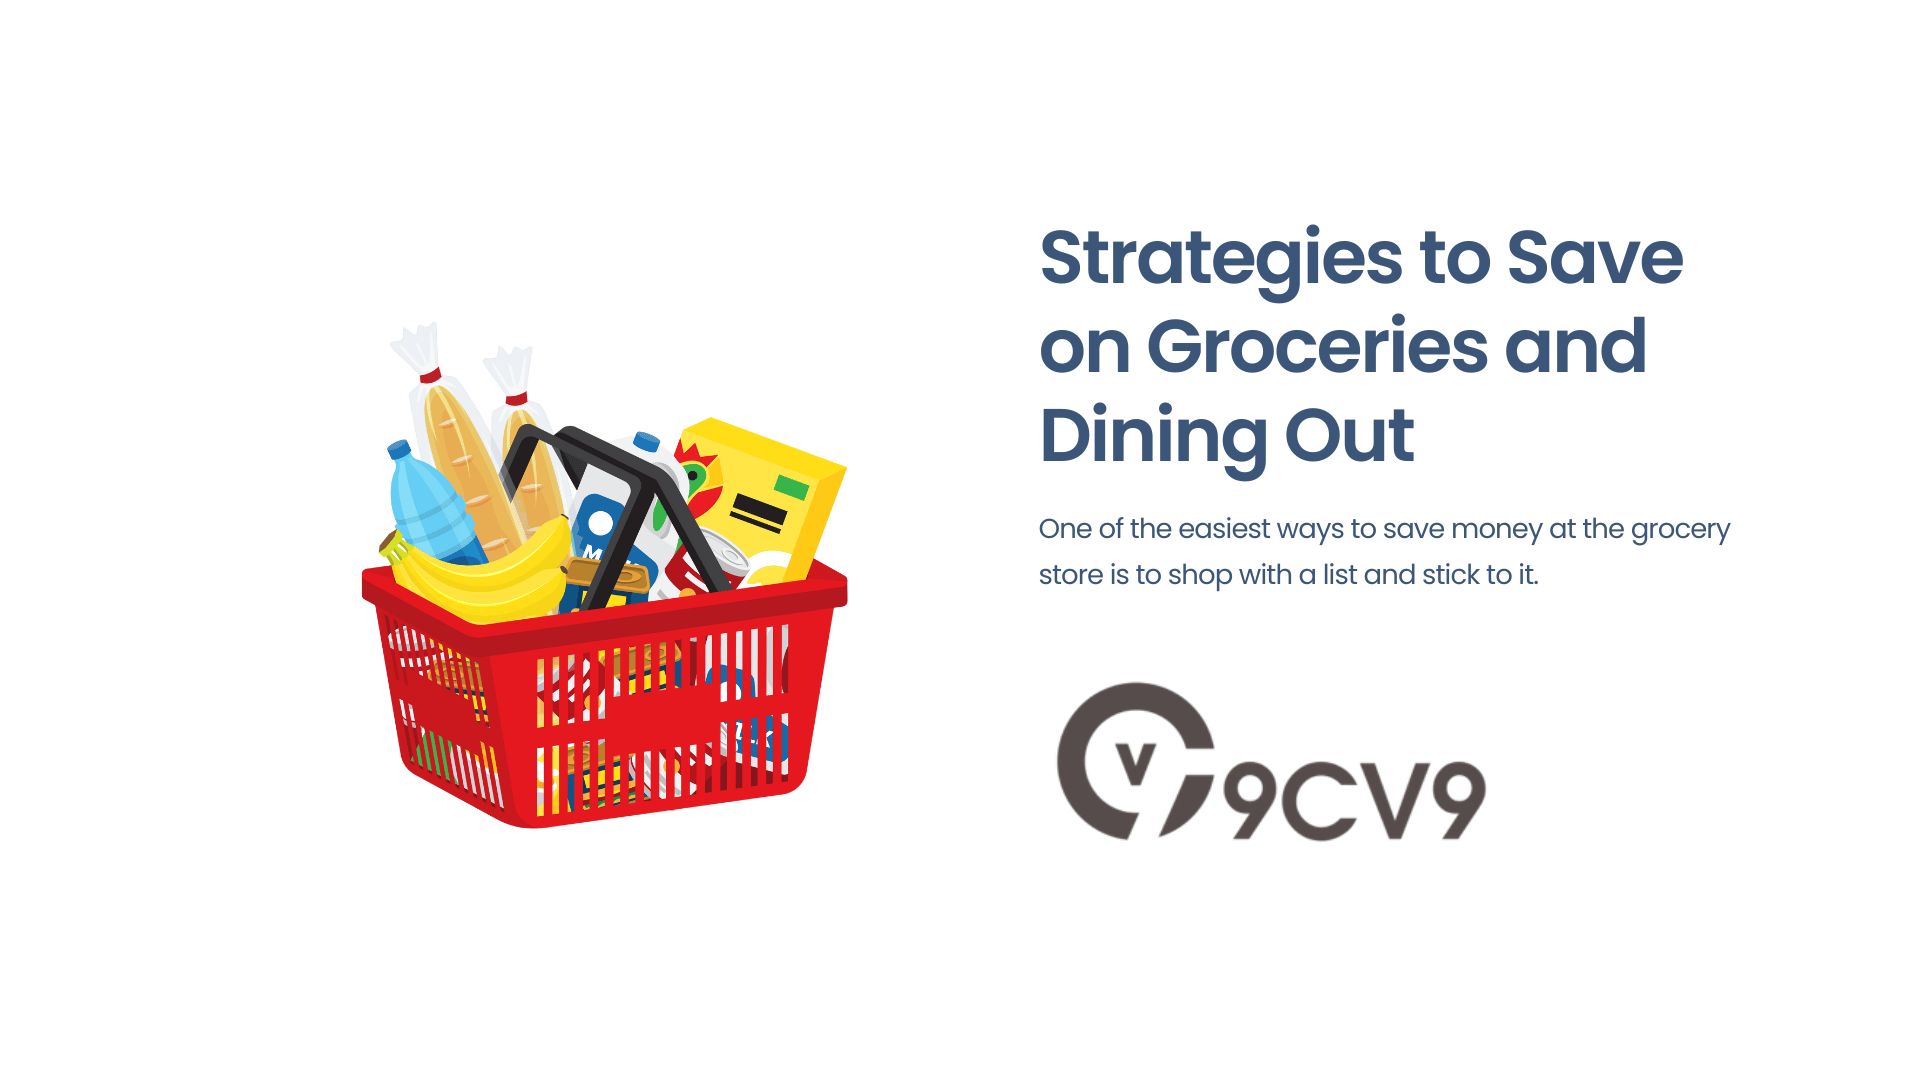 Strategies to Save on Groceries and Dining Out